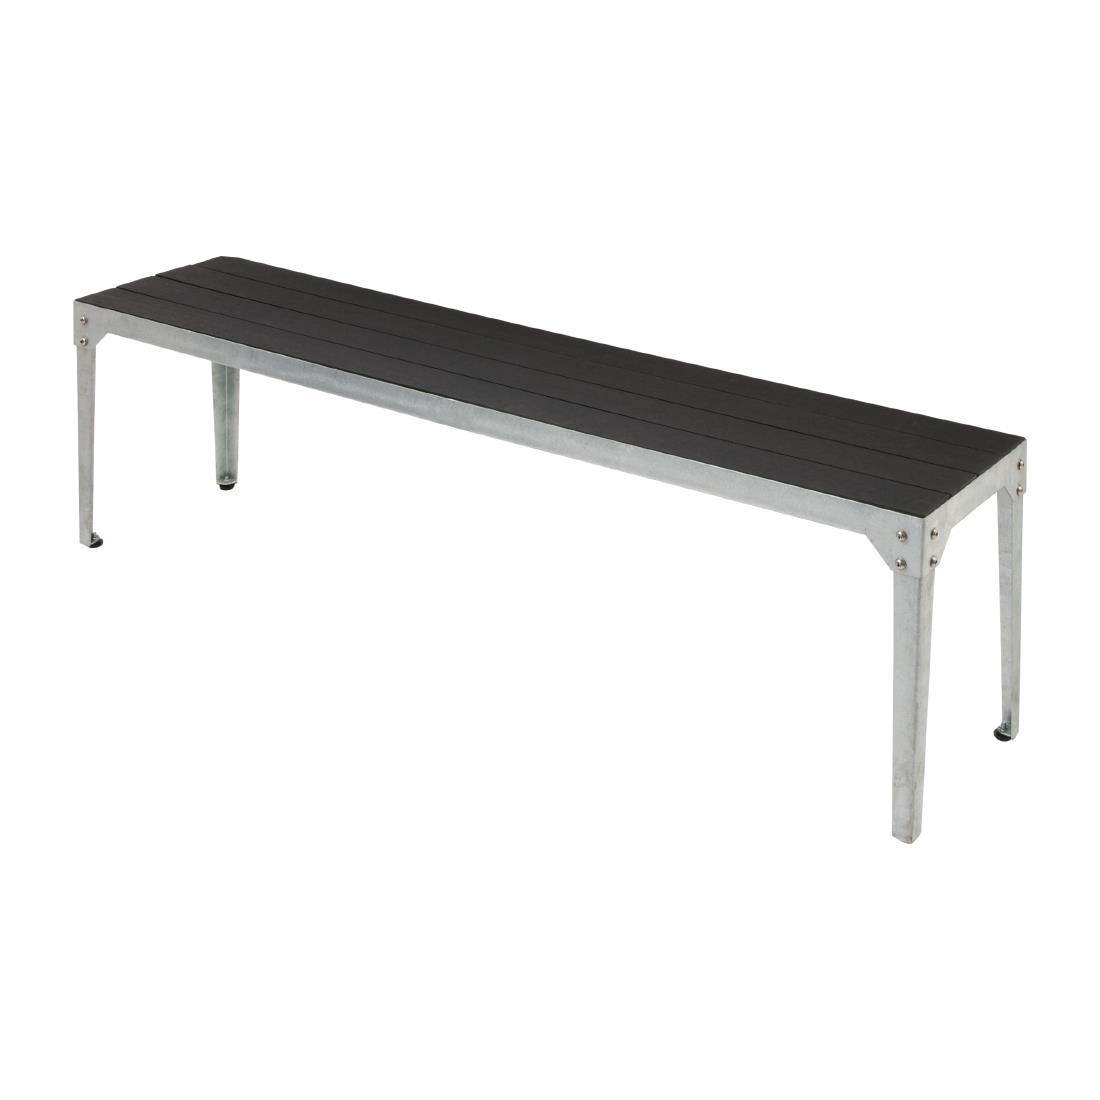 Bolero Charcoal Faux Wood and Steel Bench (Pack of 2) - DS162  - 2